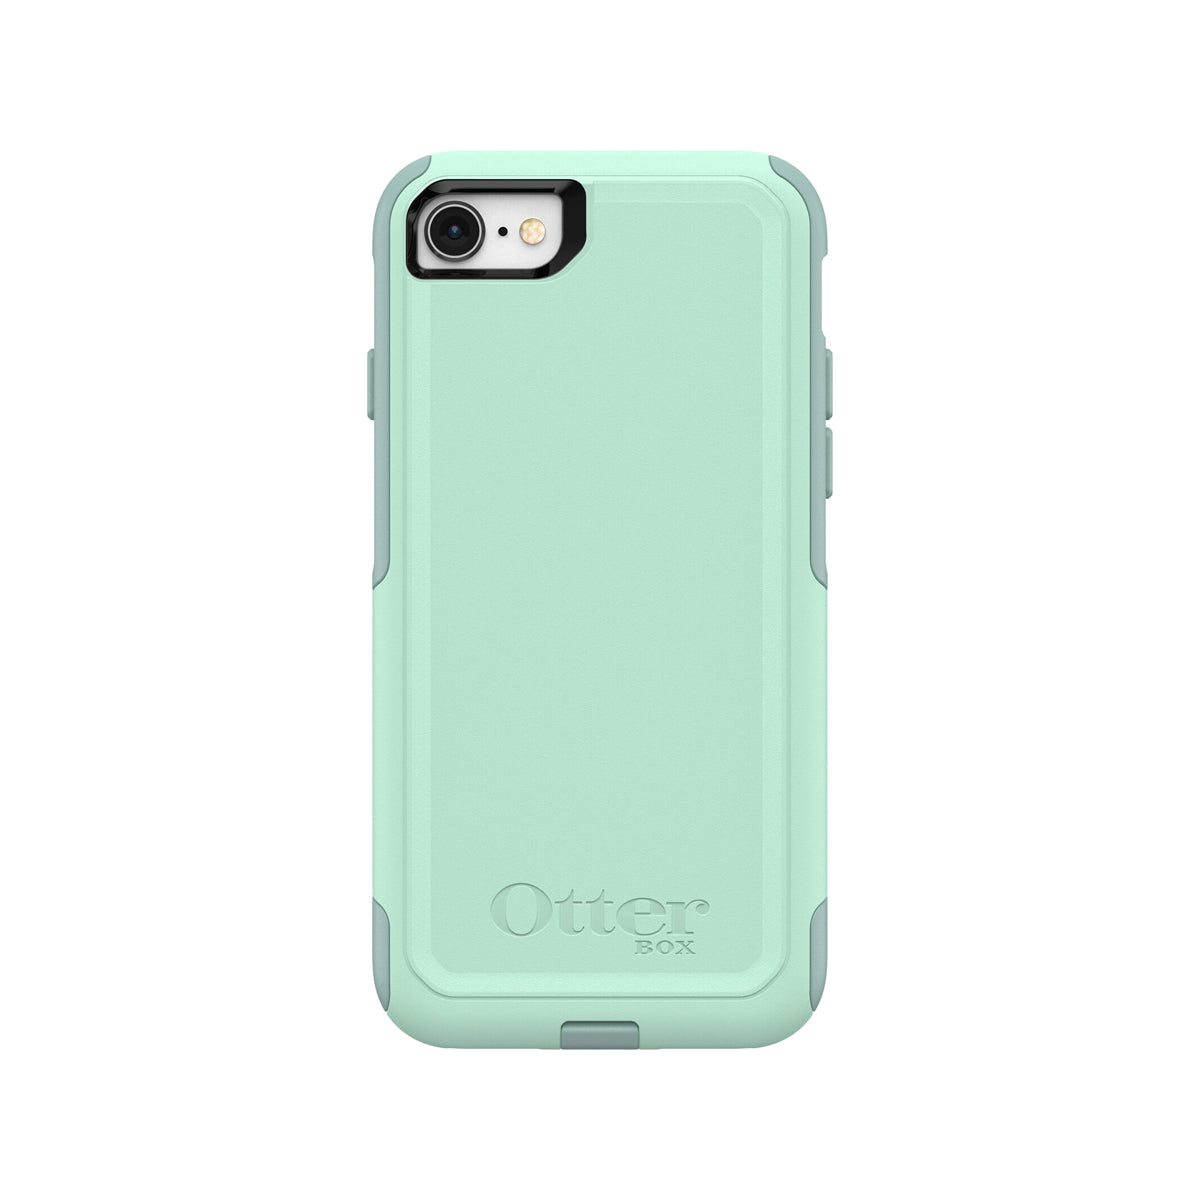 Otterbox Commuter Phone Case for iPhone 7/8 - Ocean Way.